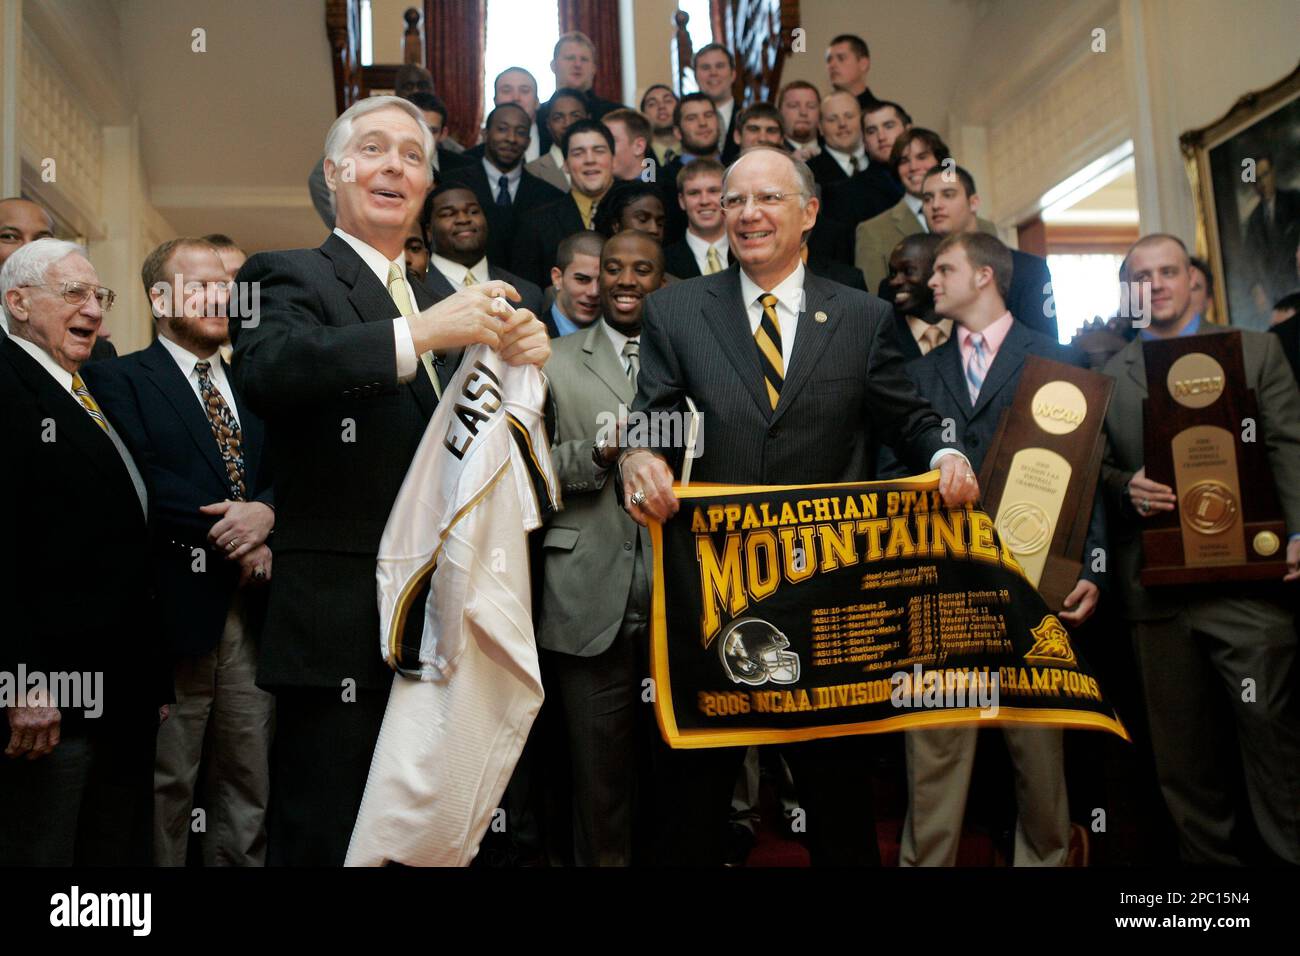 Gov. Mike Easley, left, is presented with a jersey and a banner